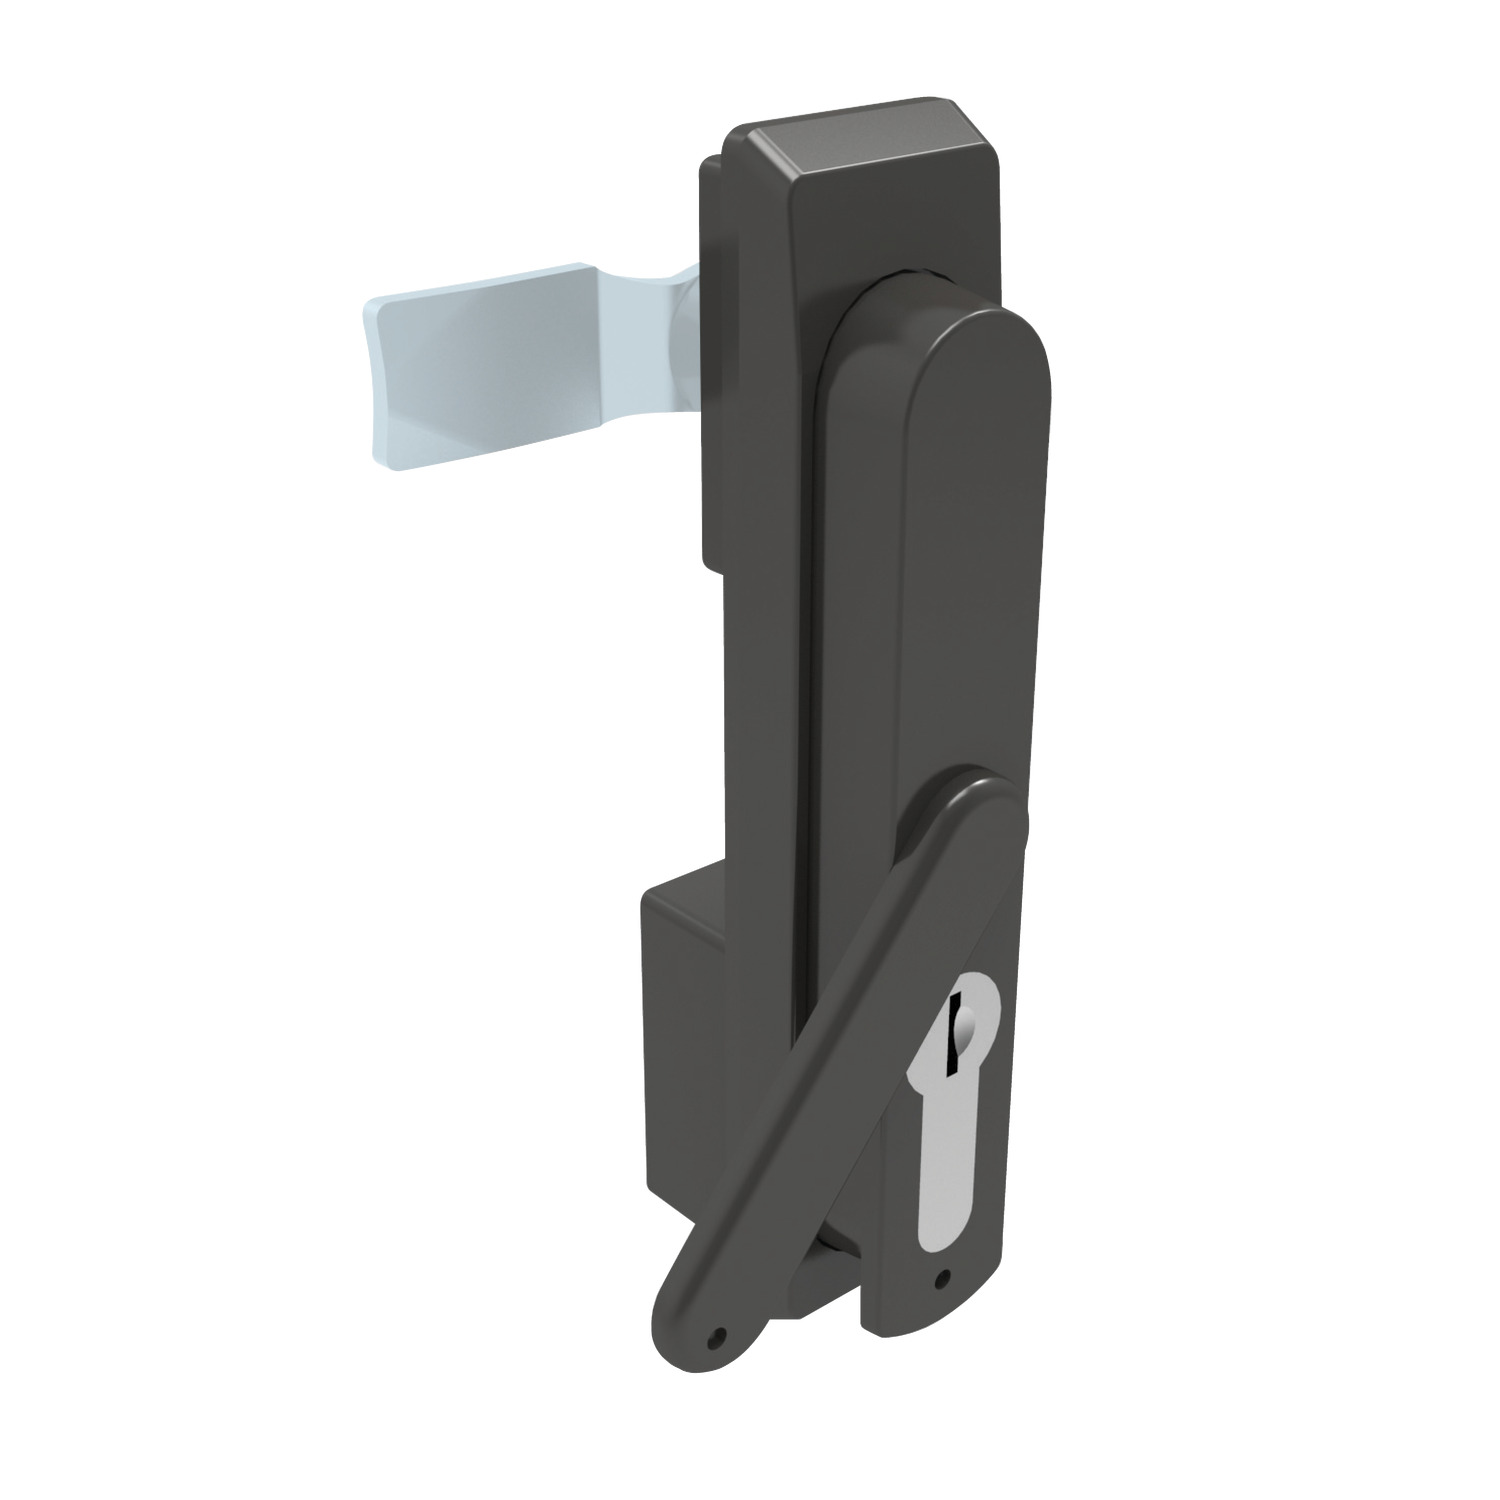 B1082.AW0020 Swing Handles padlockable - with dust cover. Body and Handle Die Cast, black finish. 40 Euro Lock.